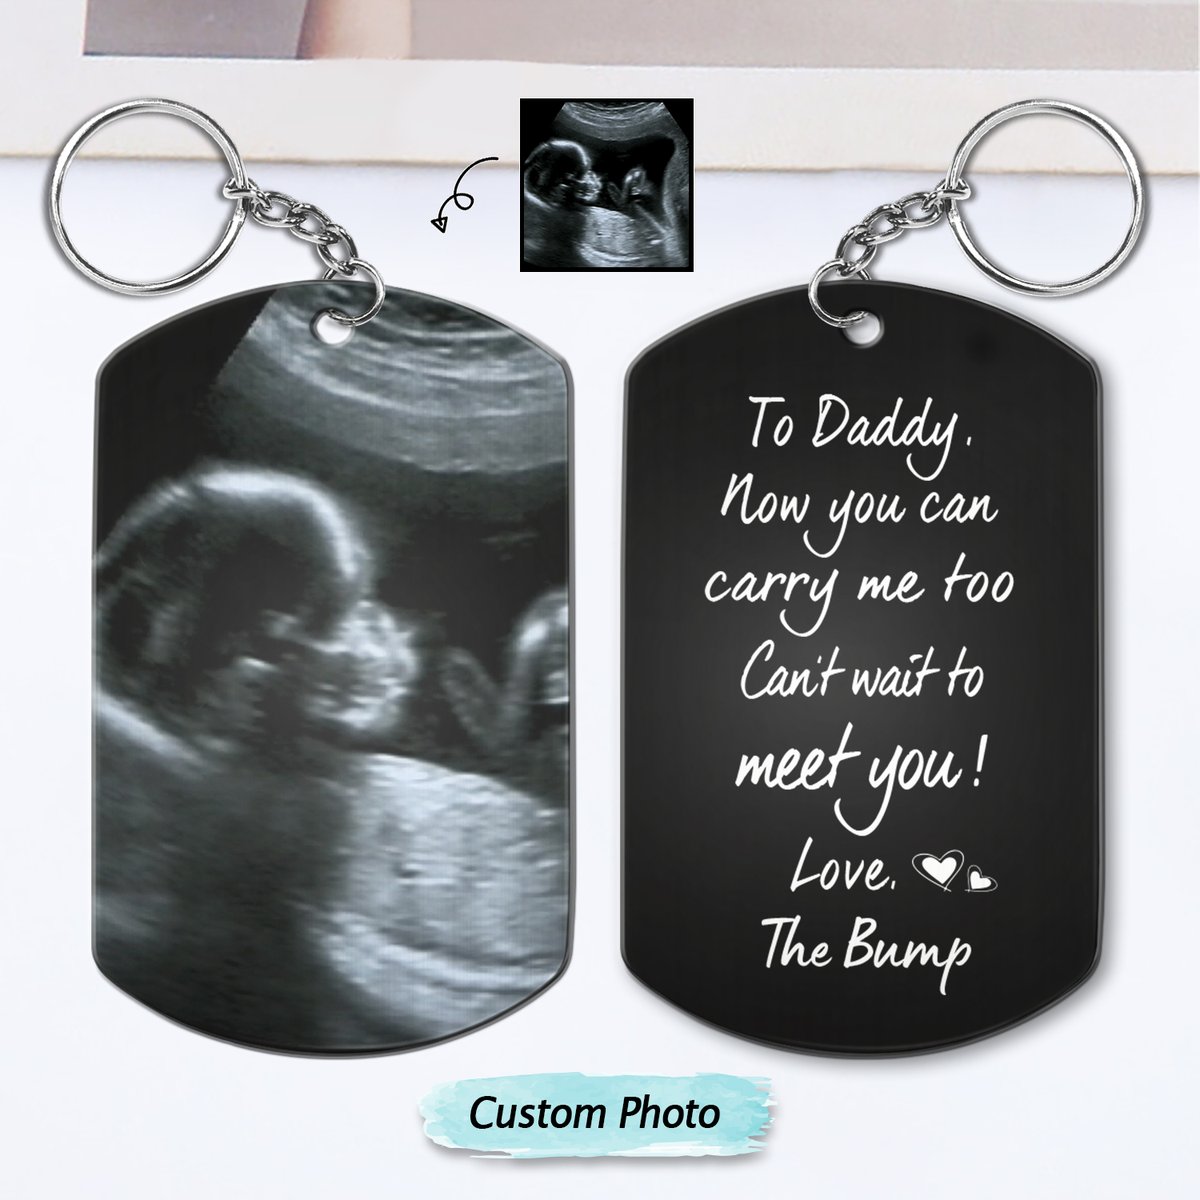 Heartfelt Message To Daddy From His Baby 💞 👉 Order here: wanderprints.com/tr170nah3162-t… ✈ Worldwide Shipping! #wanderprints #keychain #newdad #fathersday